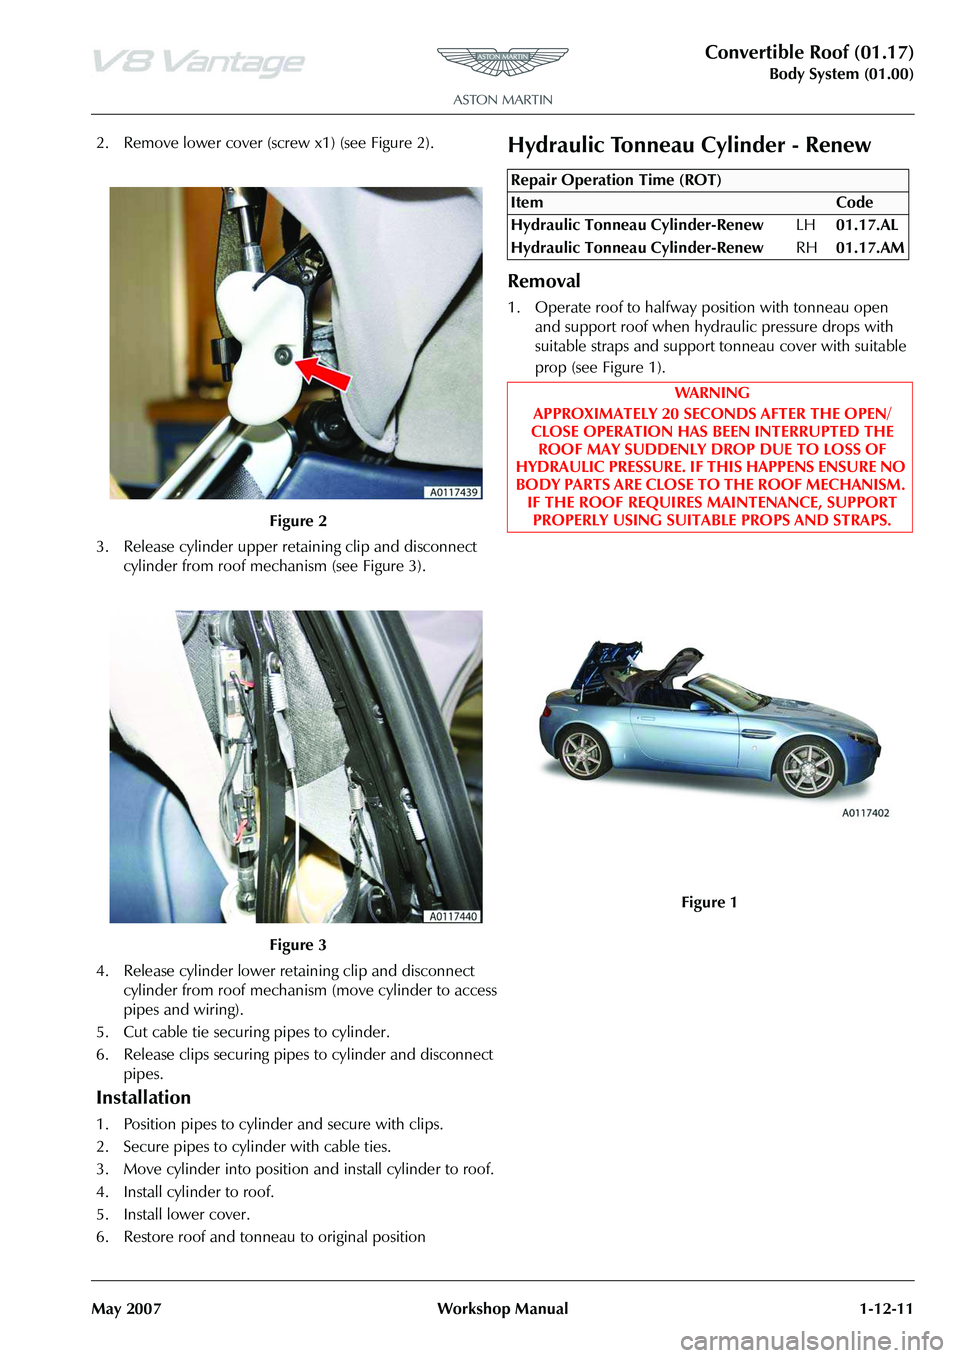 ASTON MARTIN V8 VANTAGE 2010  Workshop Manual Convertible Roof (01.17)
Body System (01.00)
May 2007 Workshop Manual 1-12-11
2. Remove lower cover (scr ew x1) (see Figure 2).
3. Release cylinder upper retaining clip and disconnect  cylinder from r